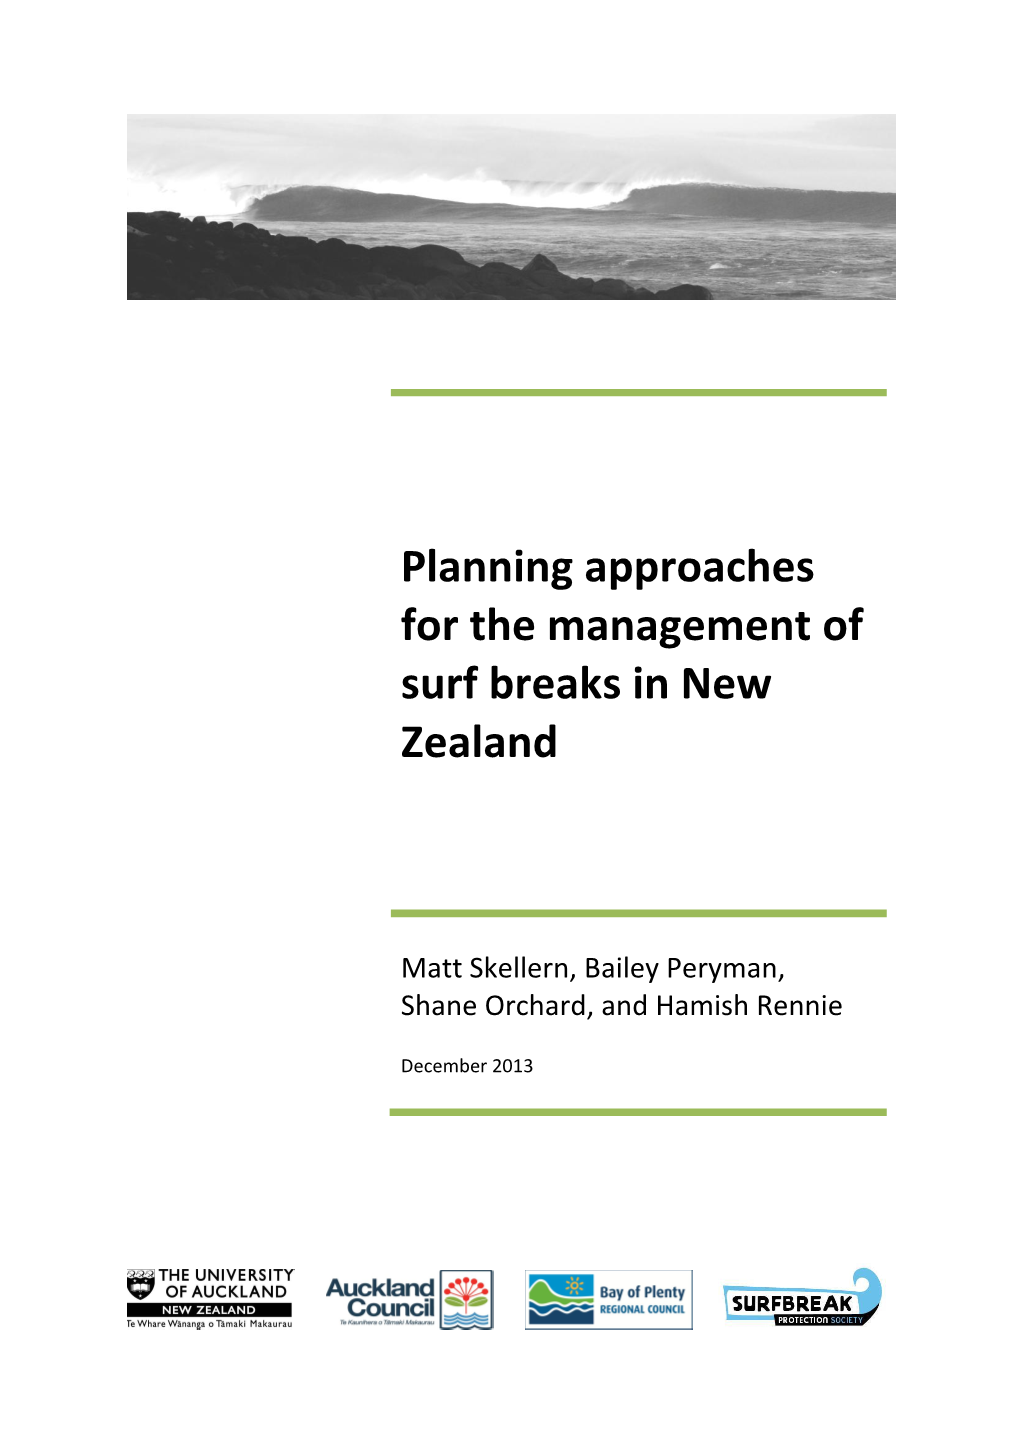 Planning Approaches for the Management of Surf Breaks in New Zealand